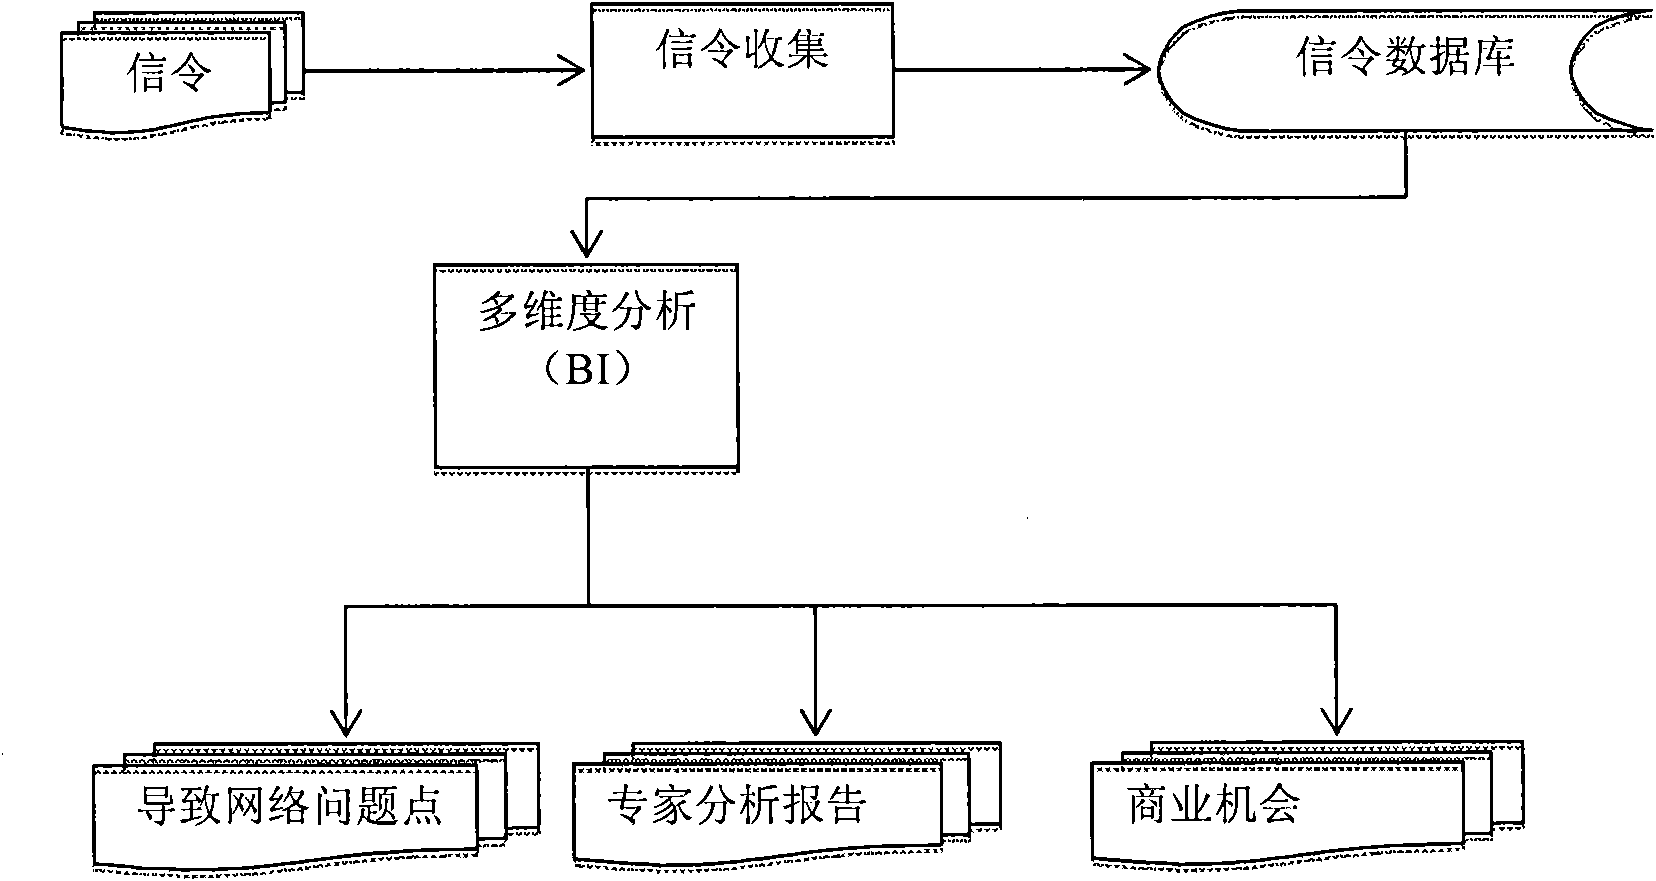 Data service flow and cell reelection-based mobile network analysis method